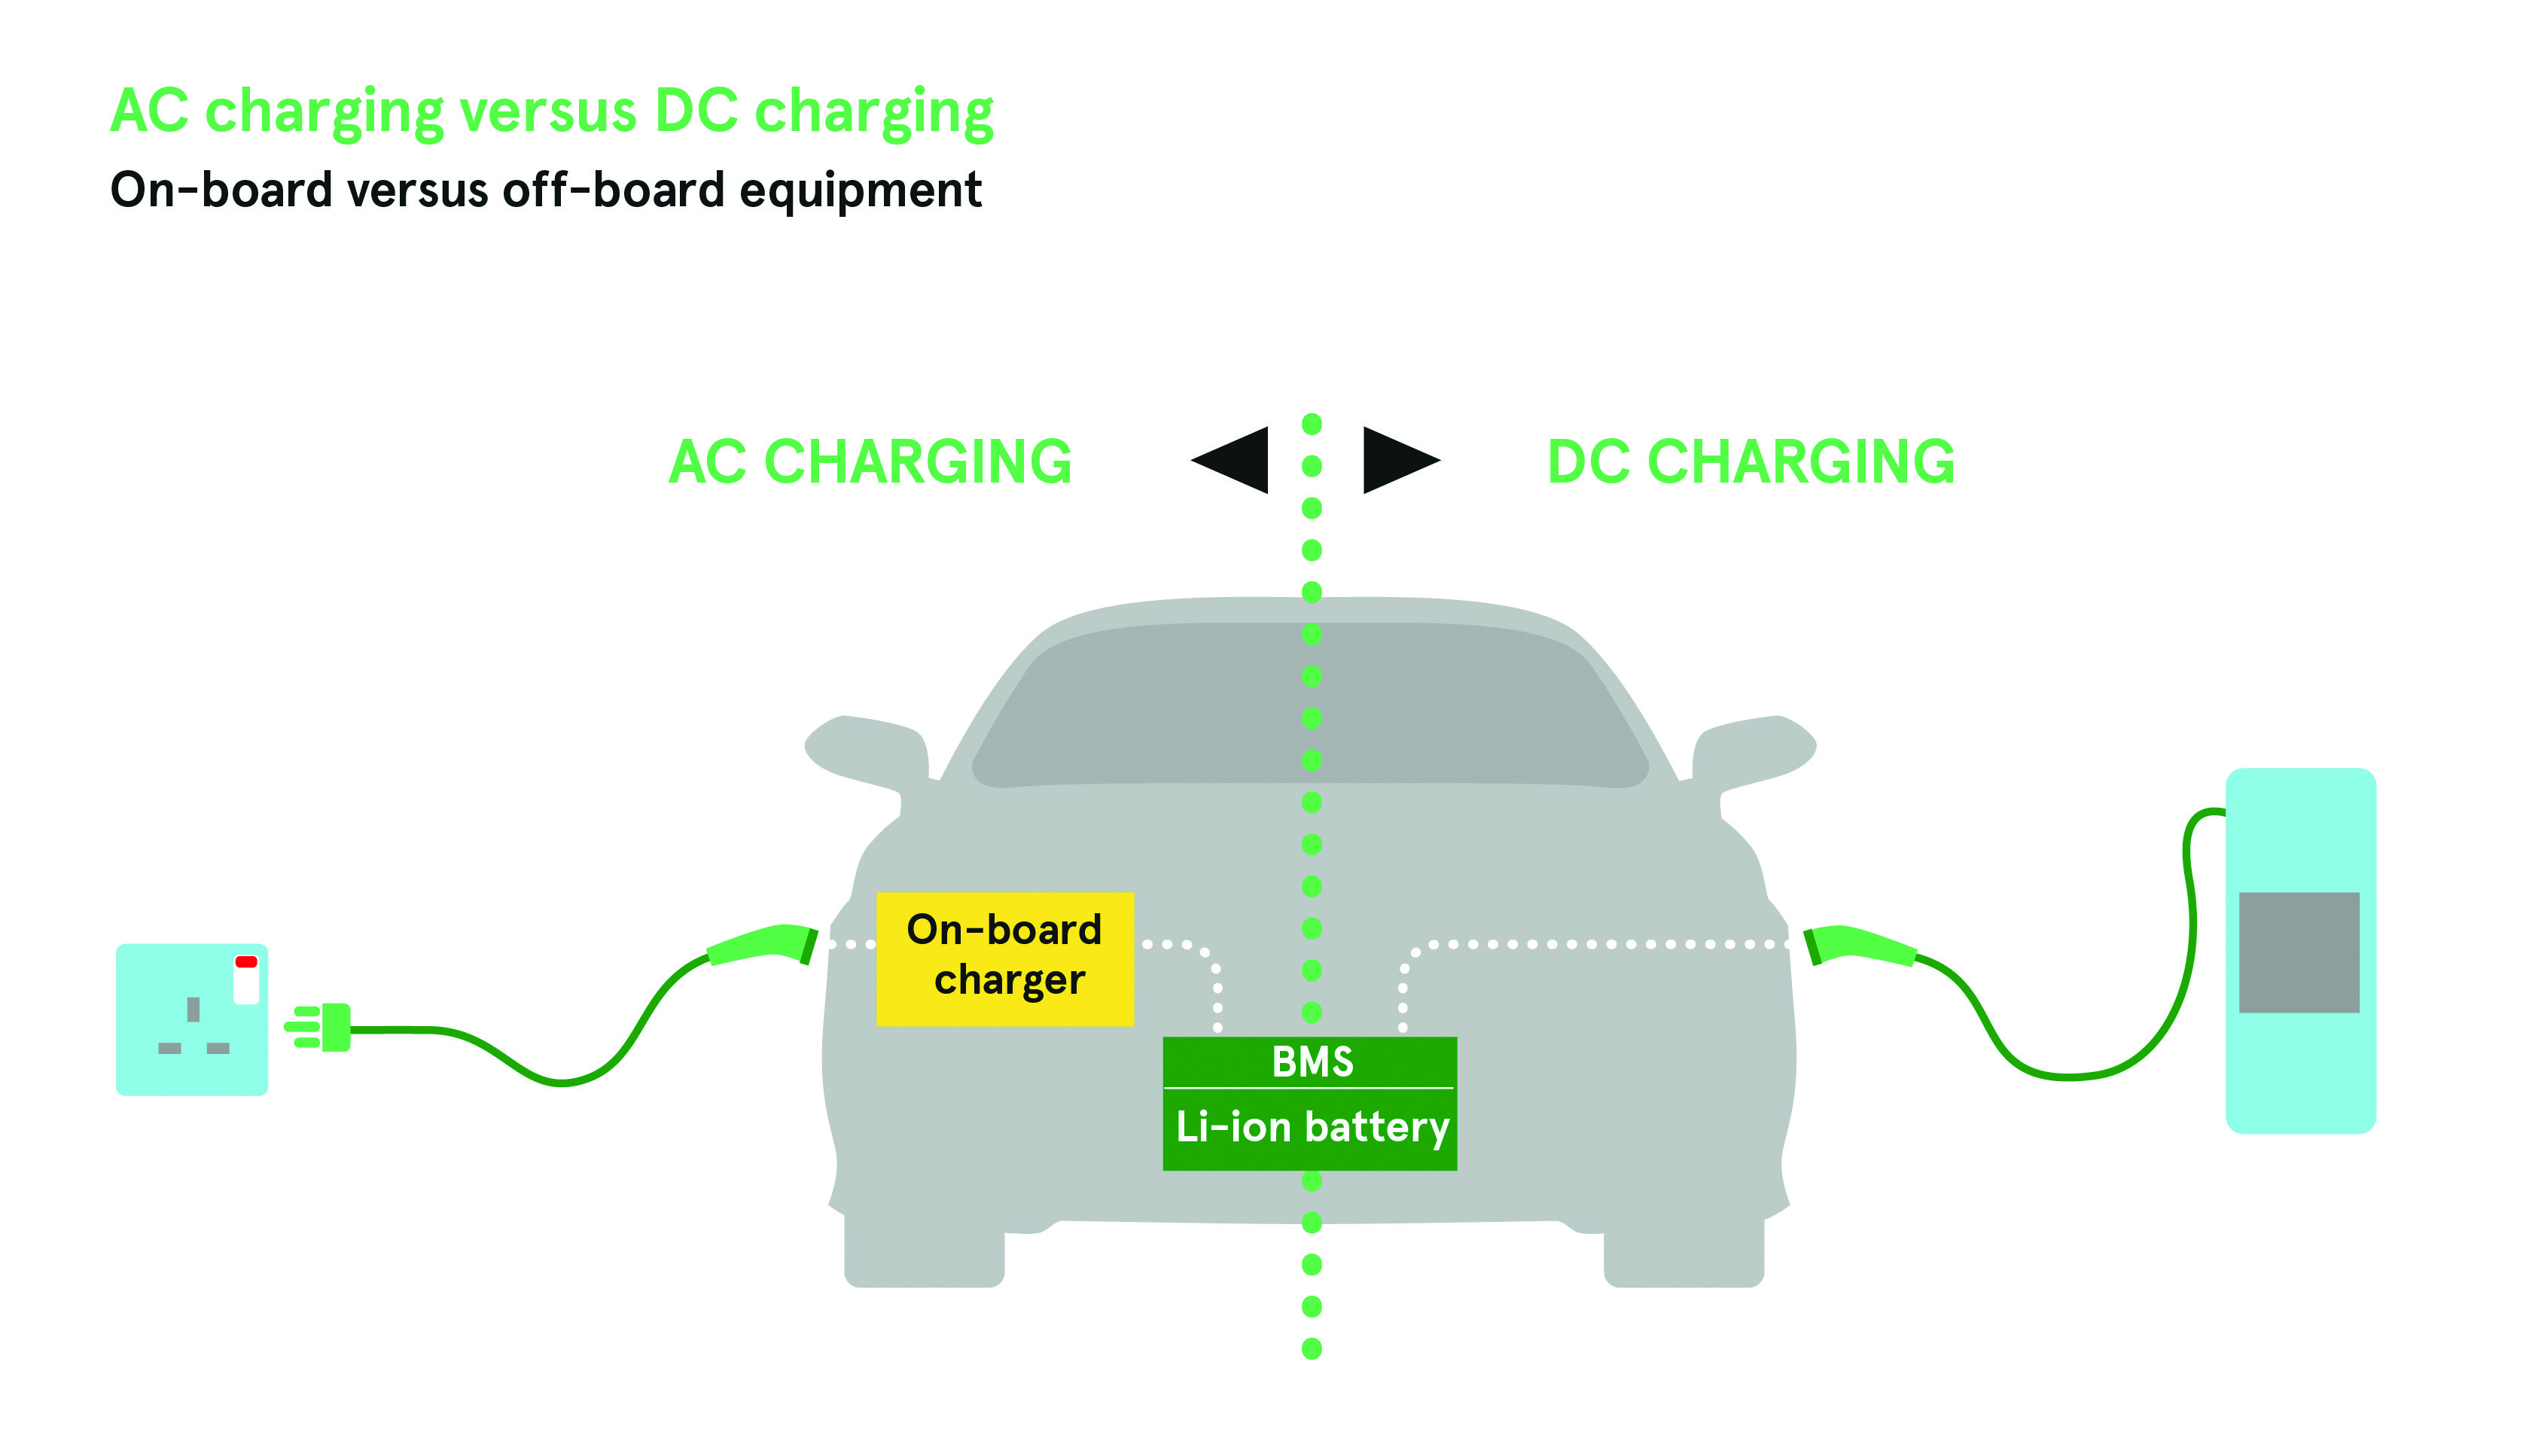 Key power supply considerations for EV charging systems